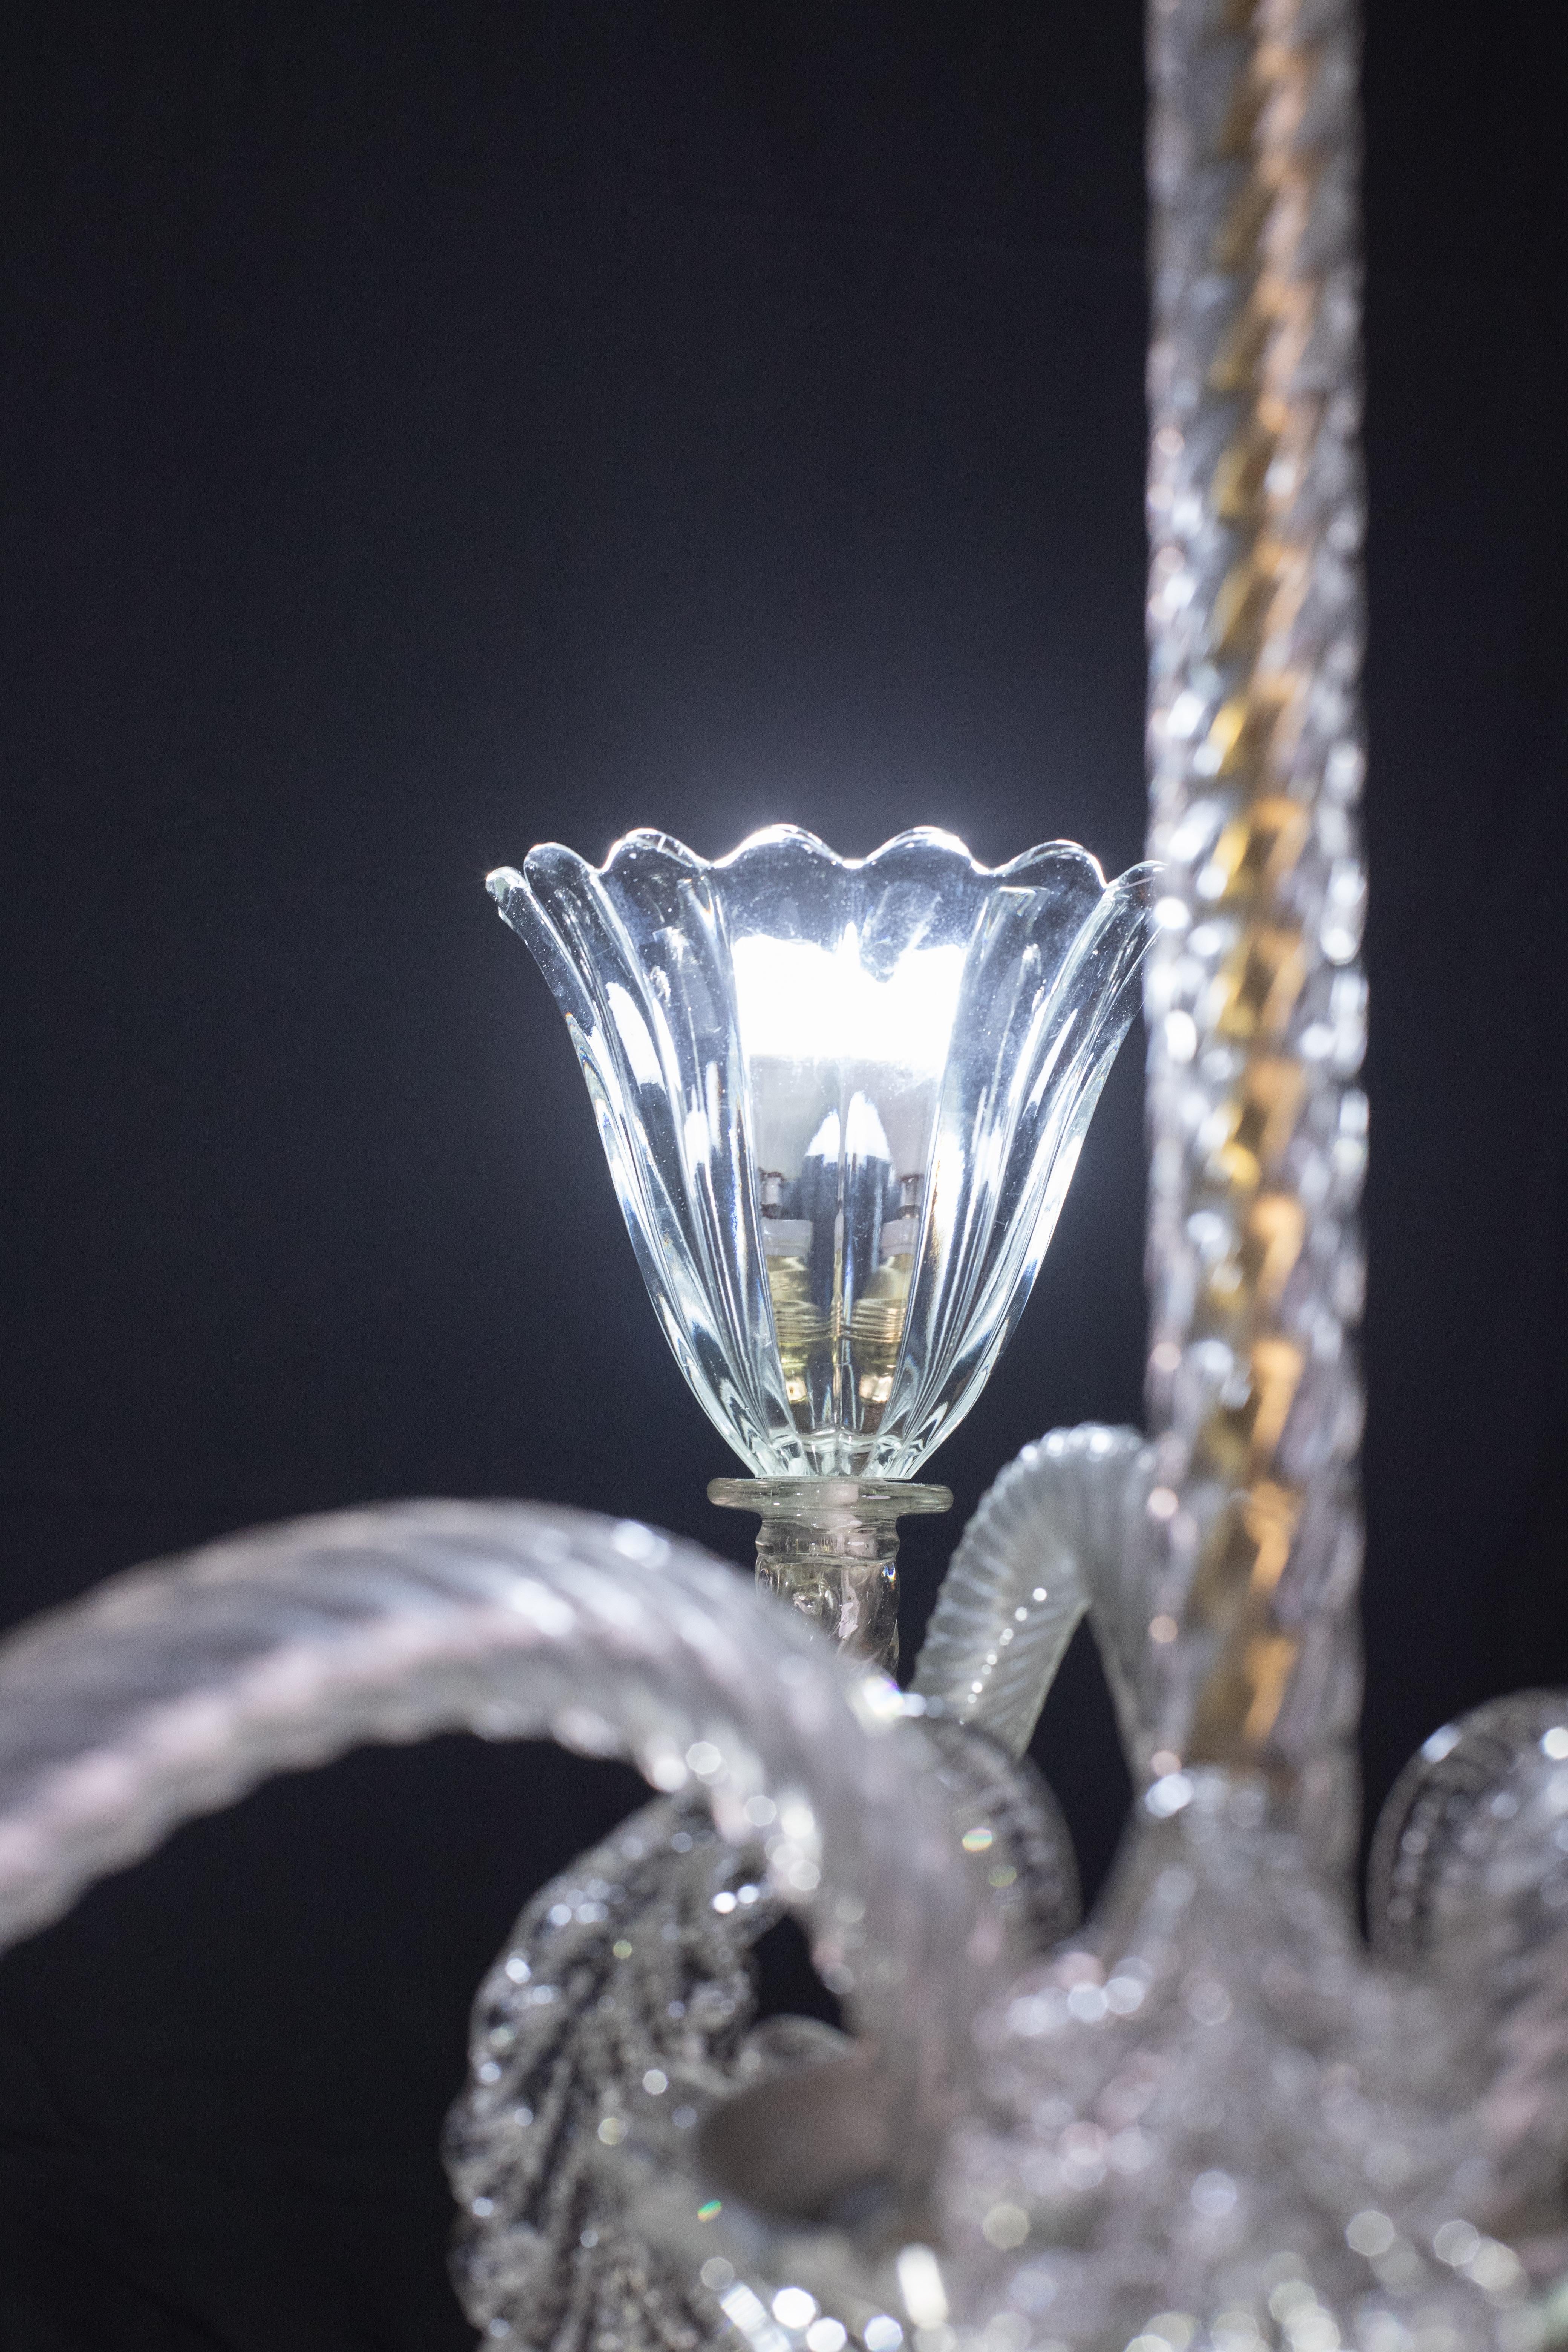 Exceptional Three Arms Chandelier by Barovier e Toso, 1950s For Sale 1